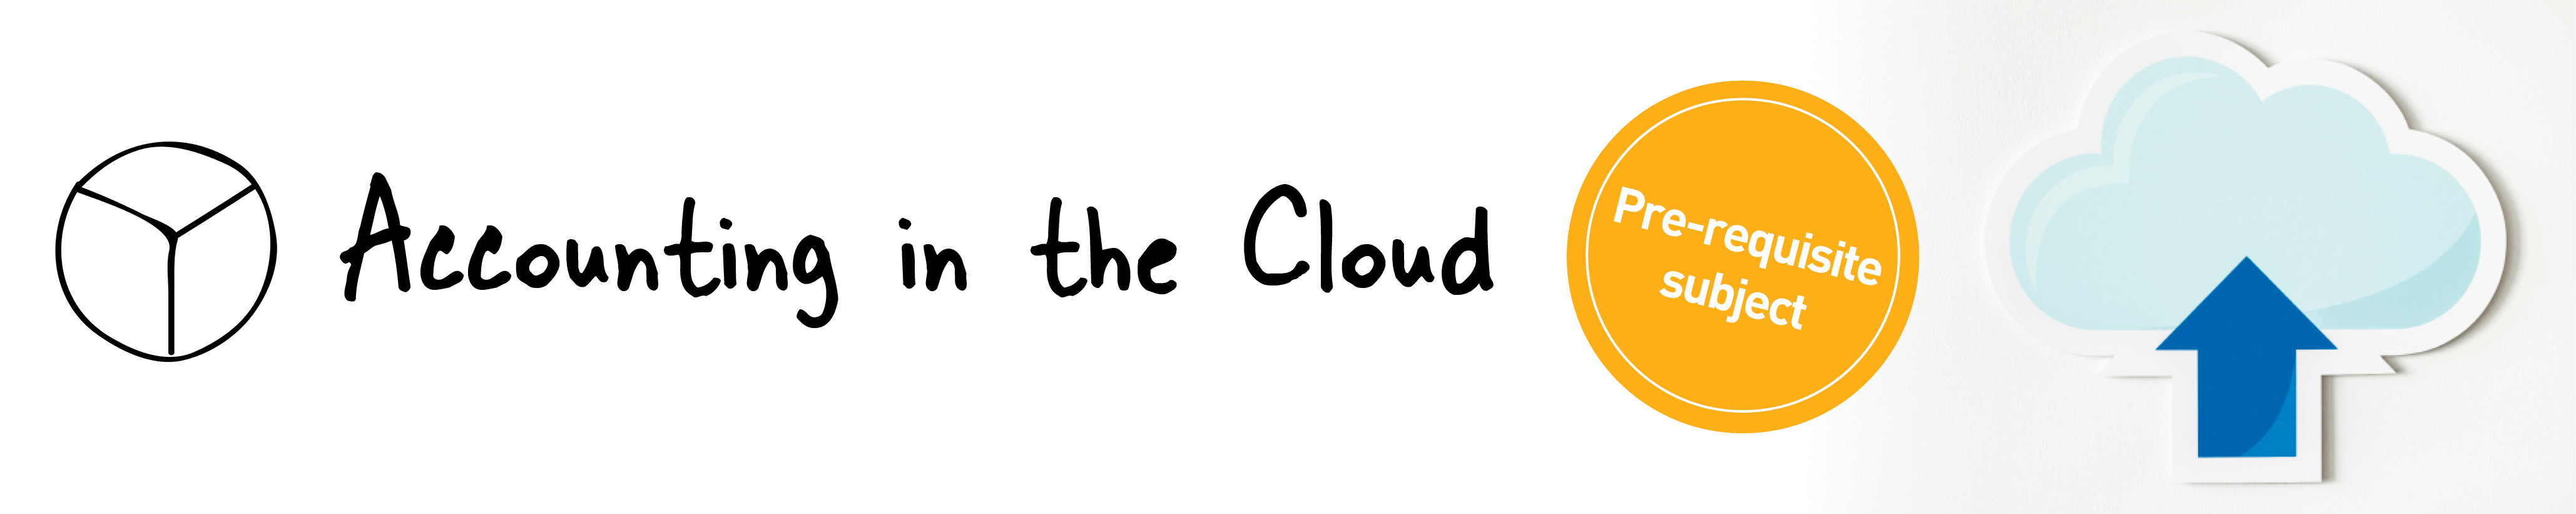 Accounting in the Cloud